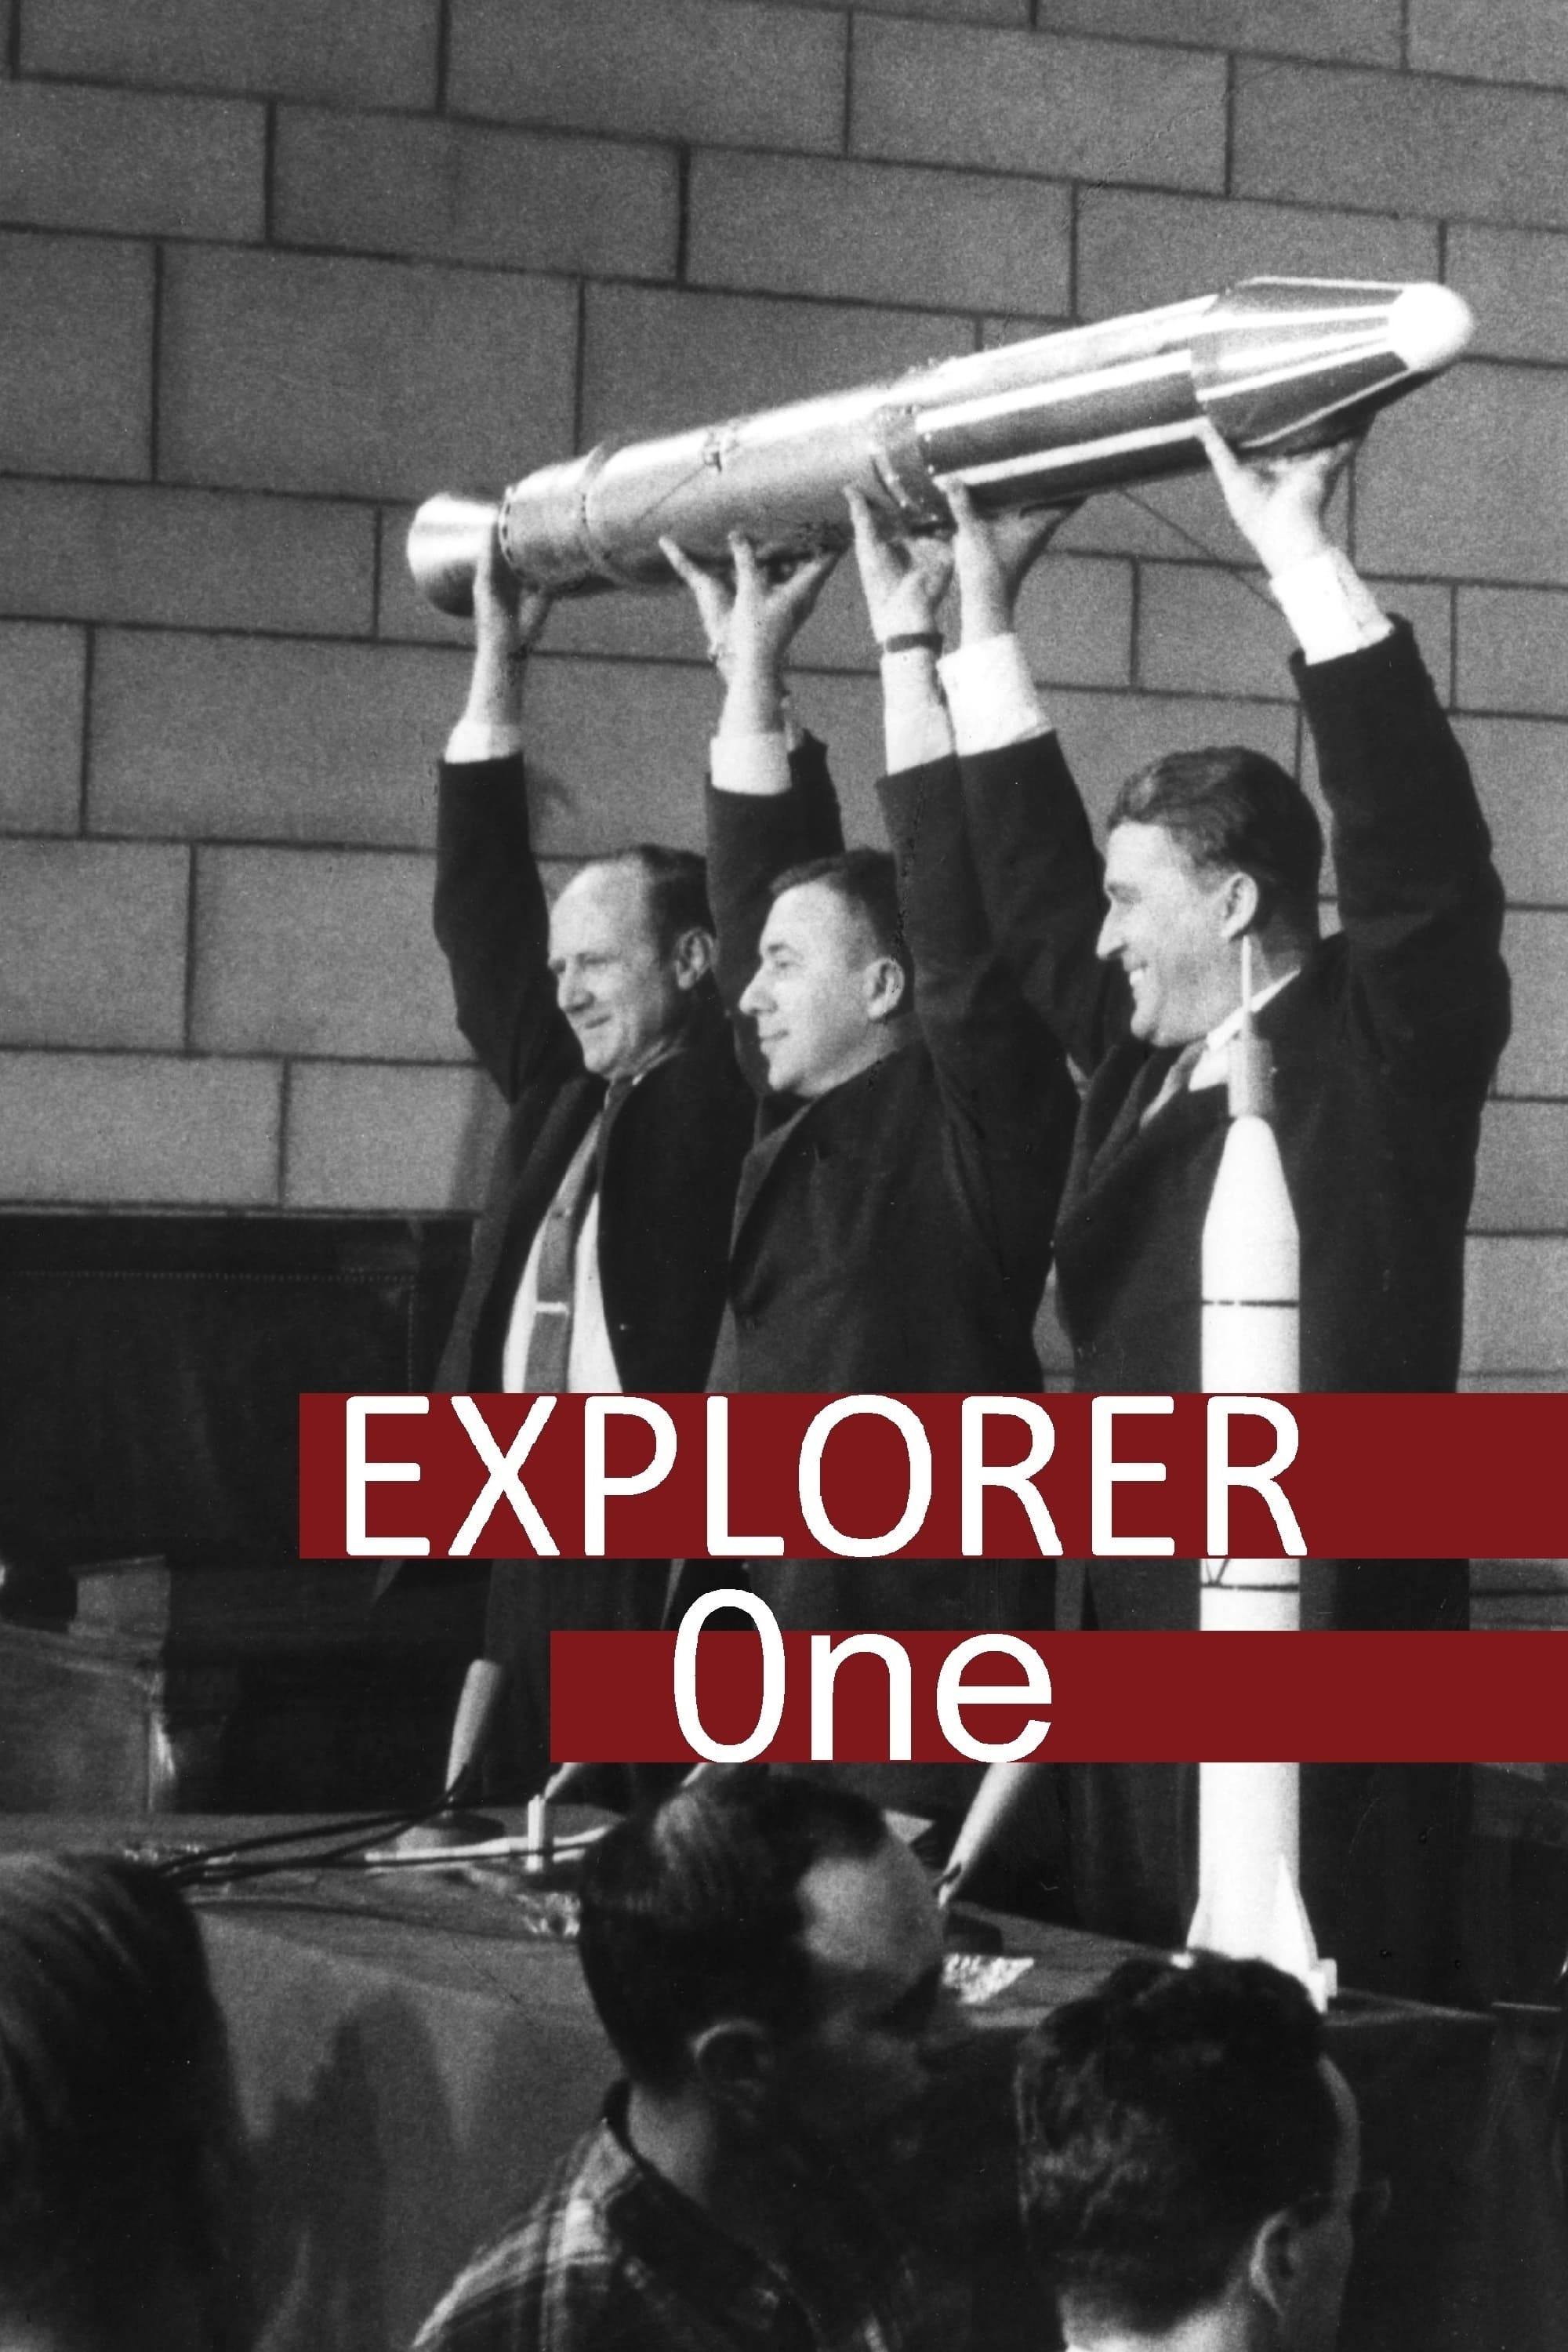 Explorer 1:  The Beginning of the Space Age